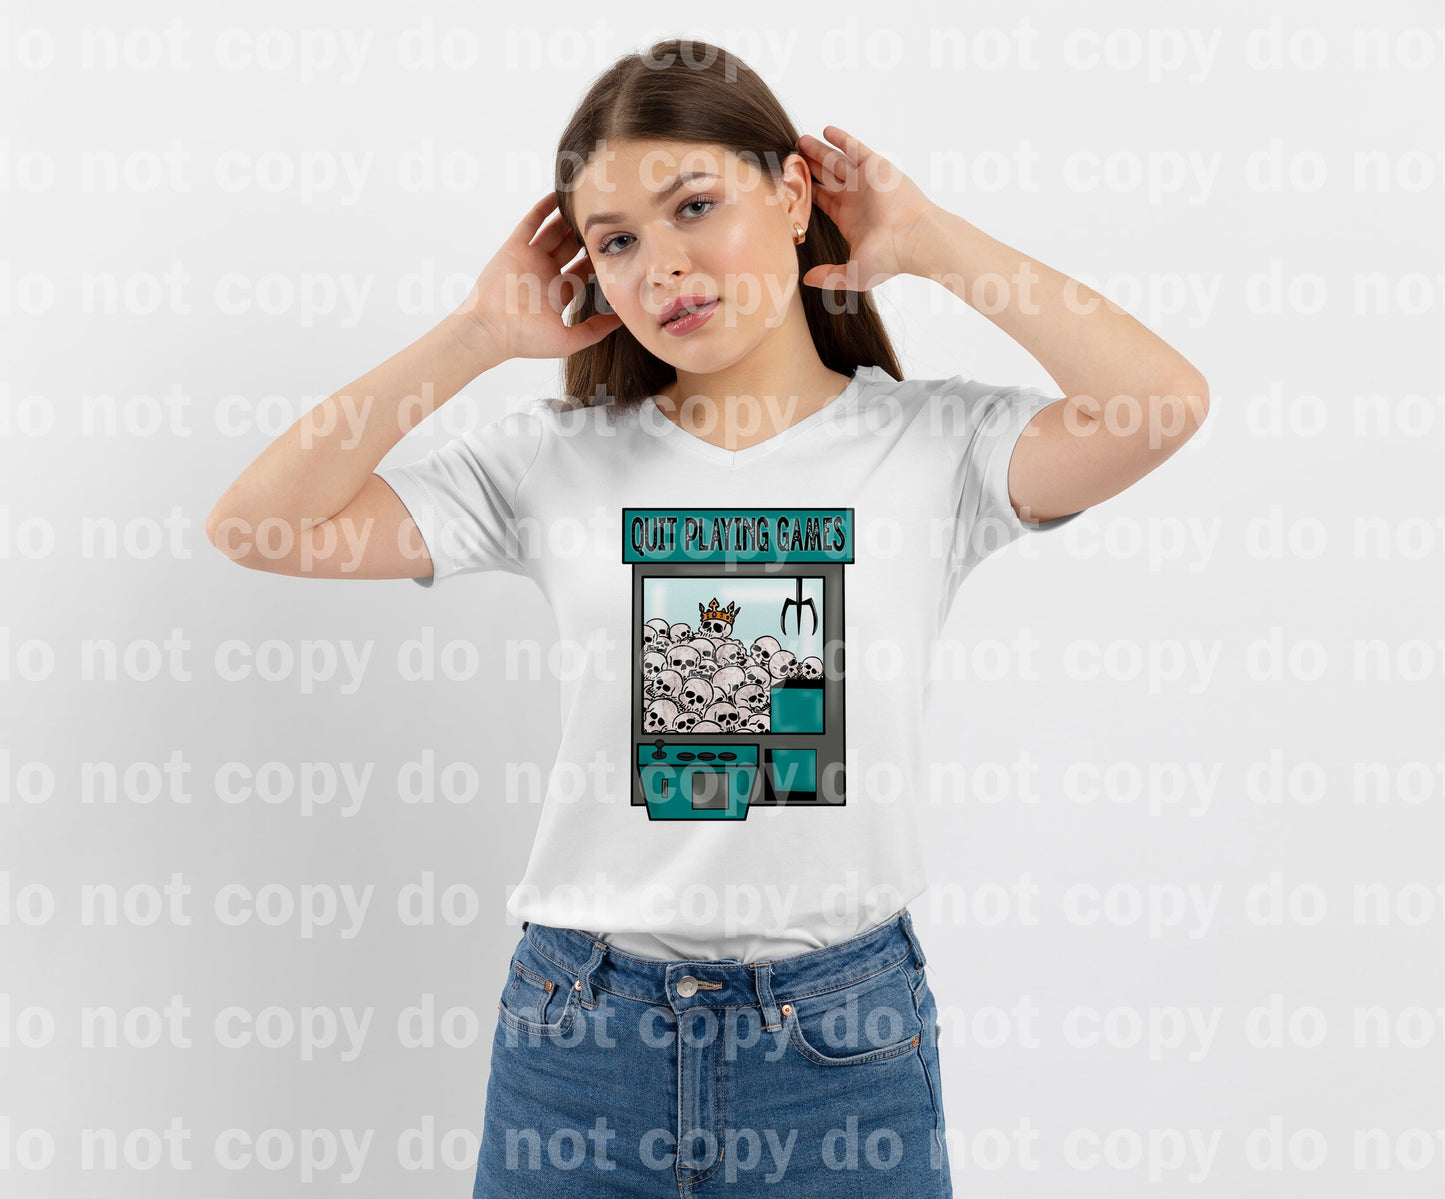 Quit Playing Games Dream Print or Sublimation Print